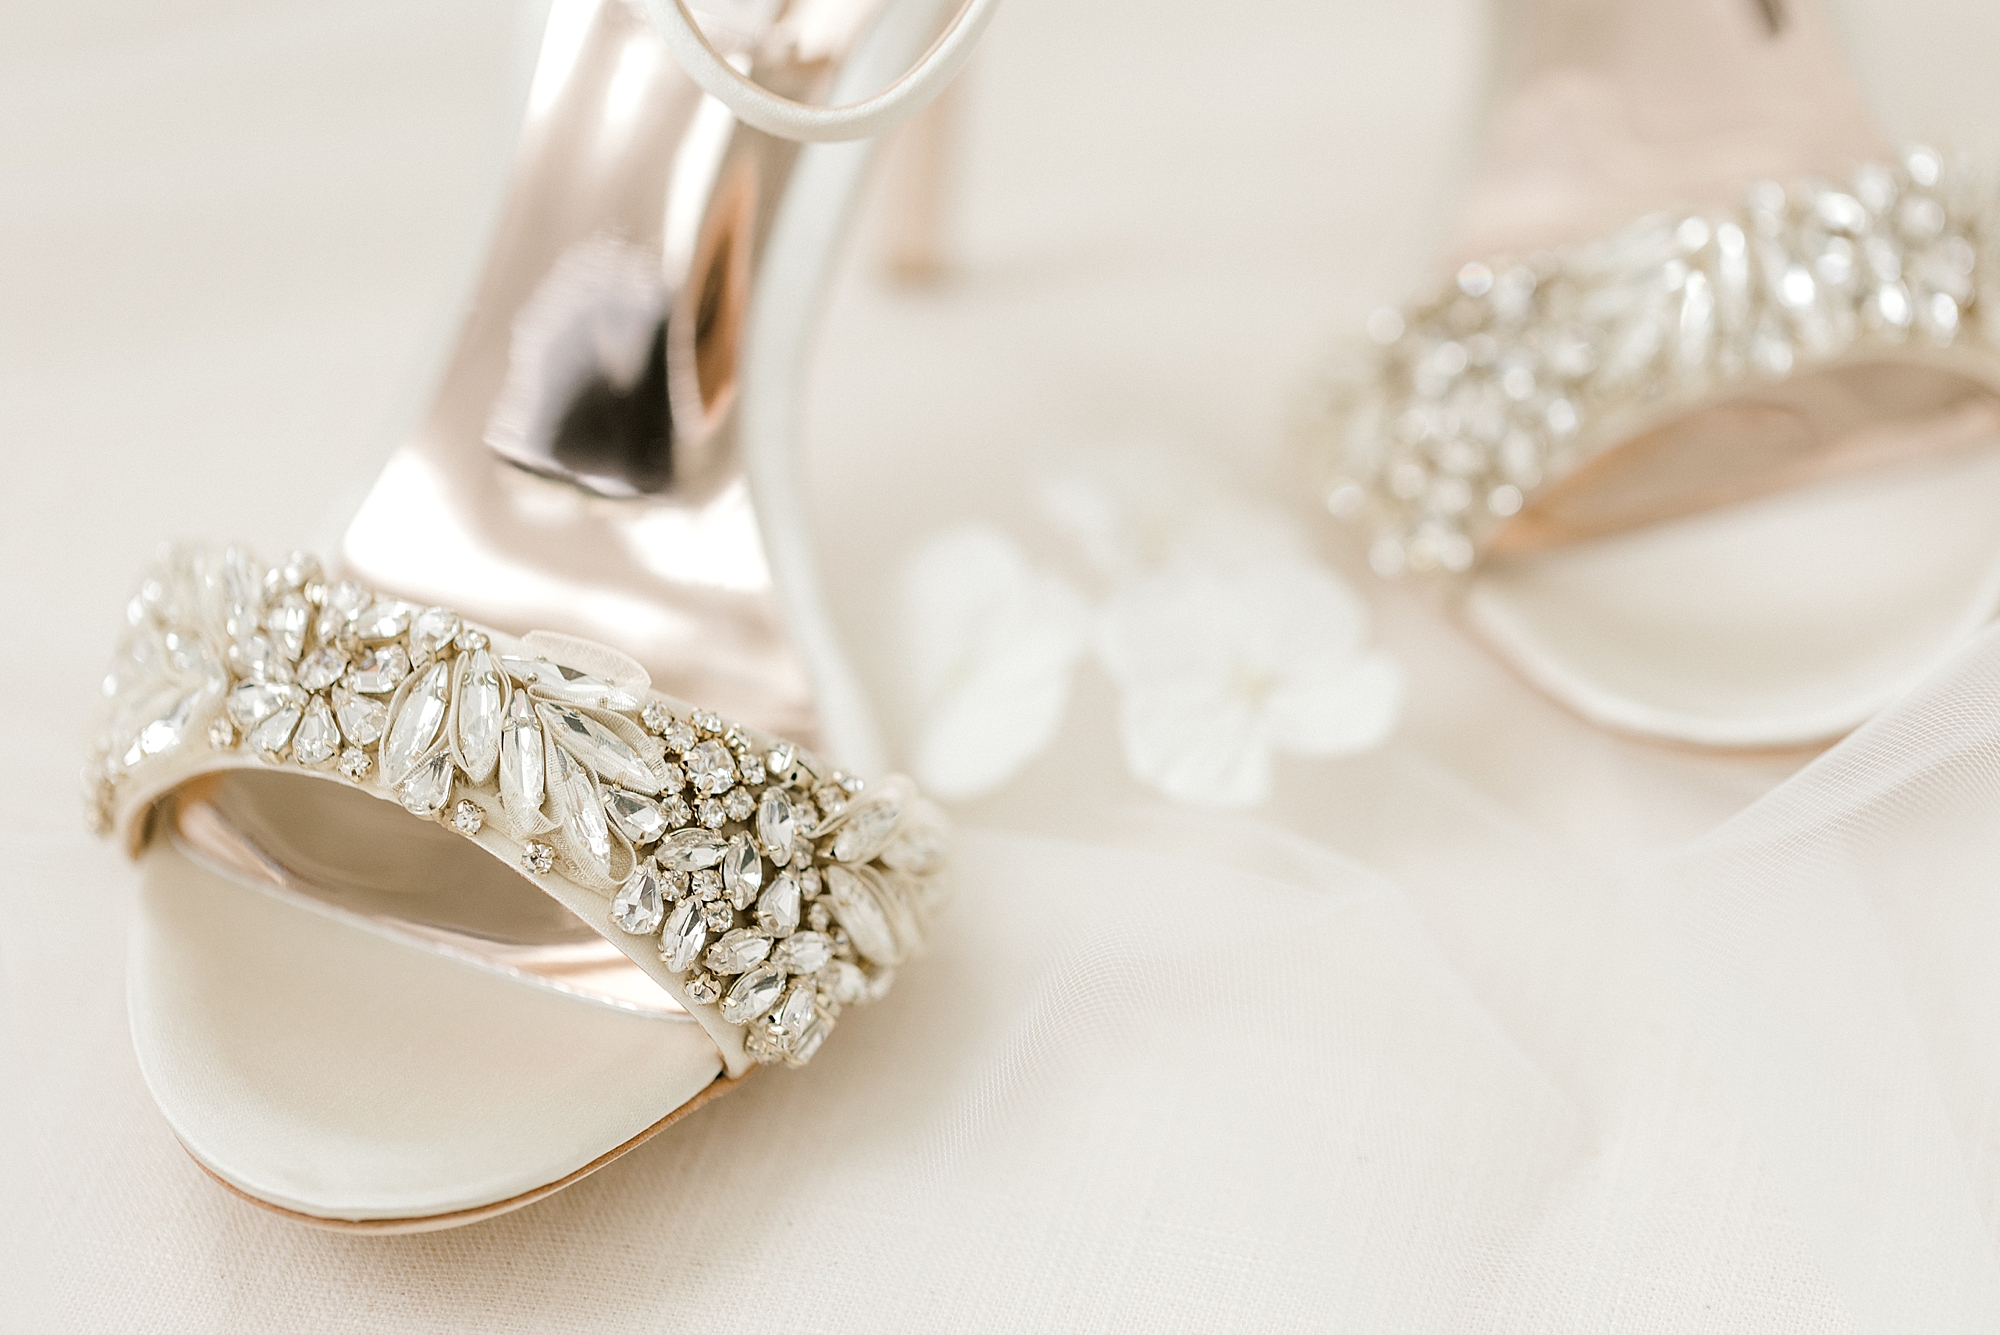 bride's shoes with jewel accents for NJ wedding day